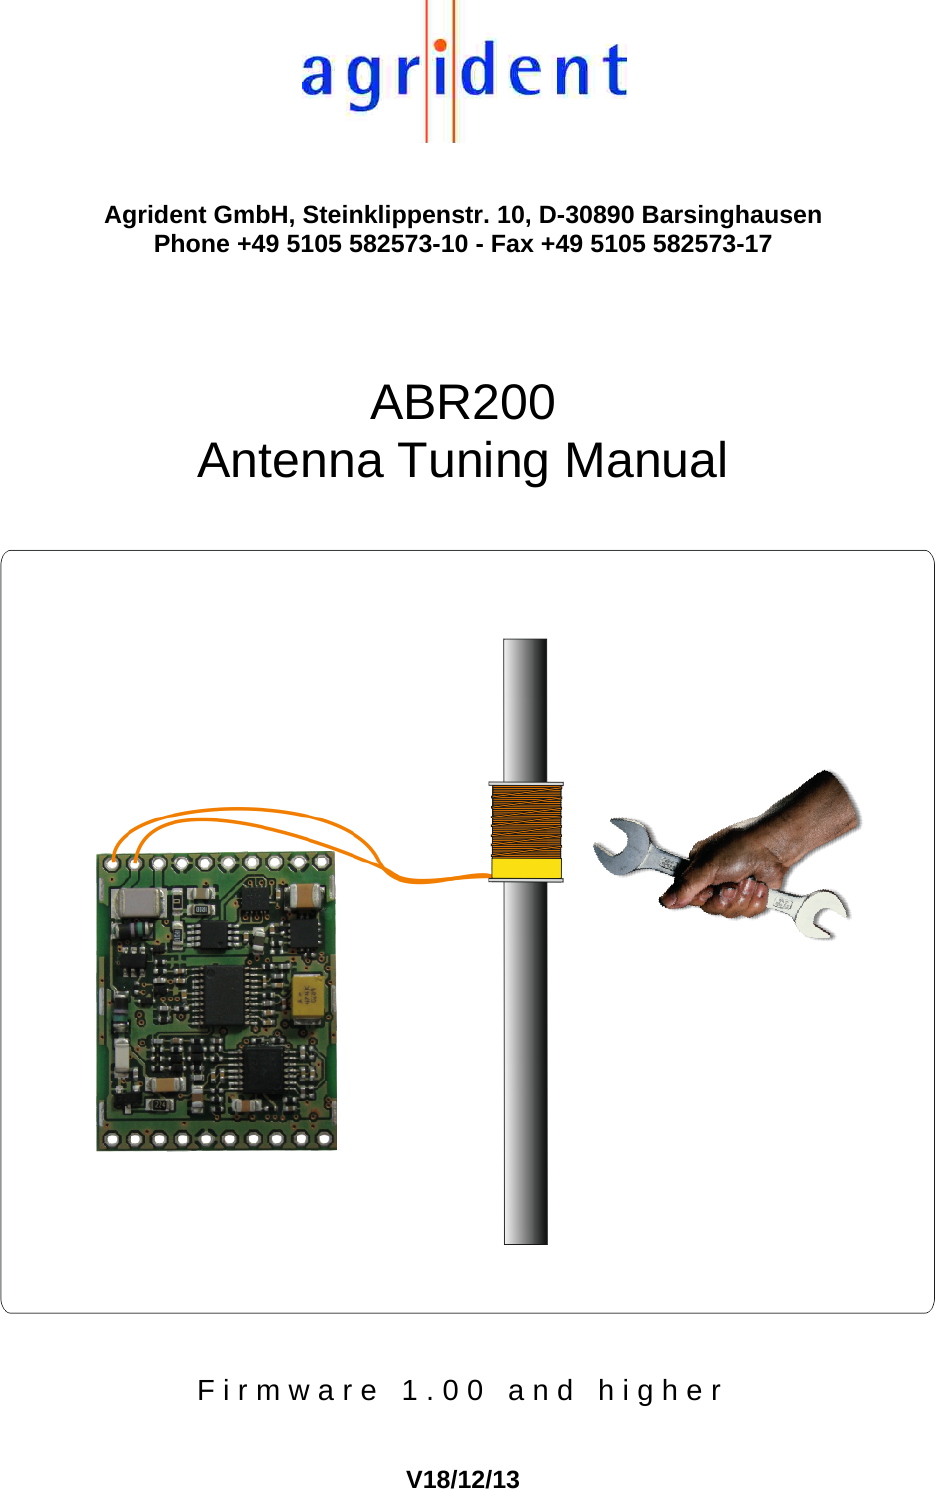   Agrident GmbH, Steinklippenstr. 10, D-30890 Barsinghausen Phone +49 5105 582573-10 - Fax +49 5105 582573-17   ABR200  Antenna Tuning Manual    Firmware 1.00 and higher  V18/12/13   